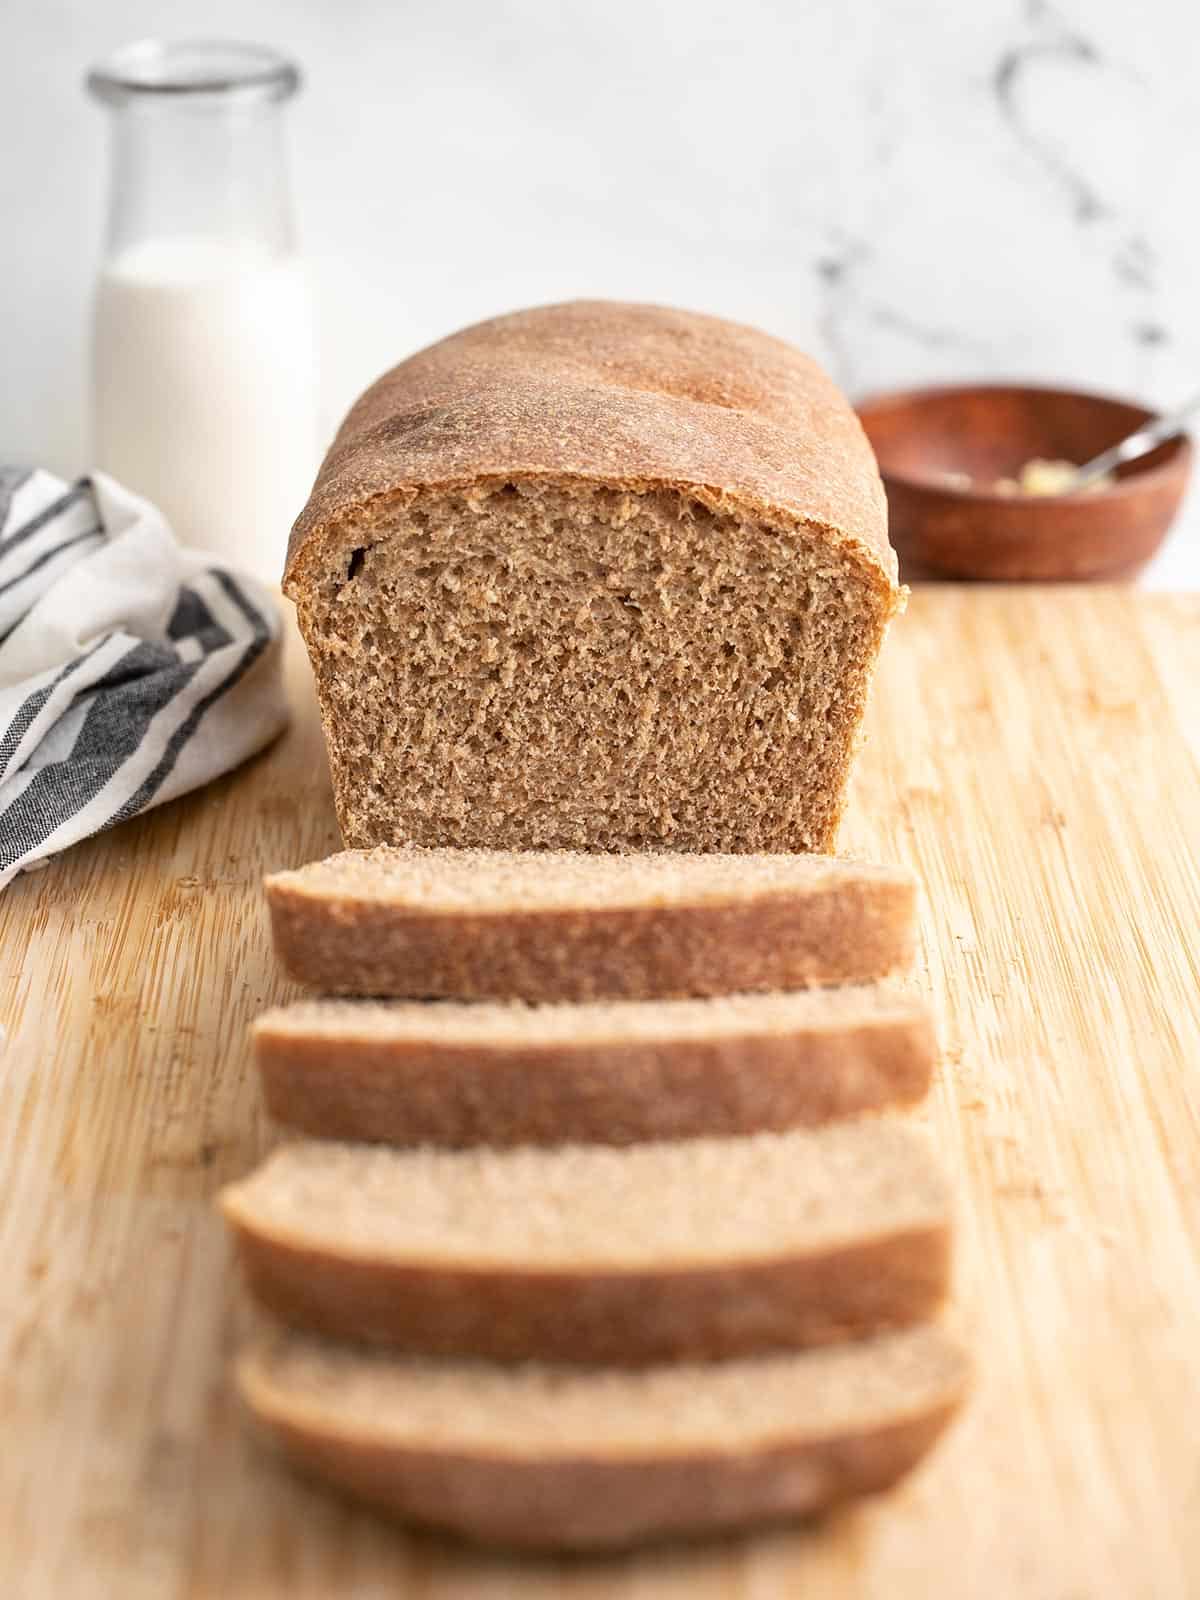 Front view of a loaf of honey wheat bread sliced.